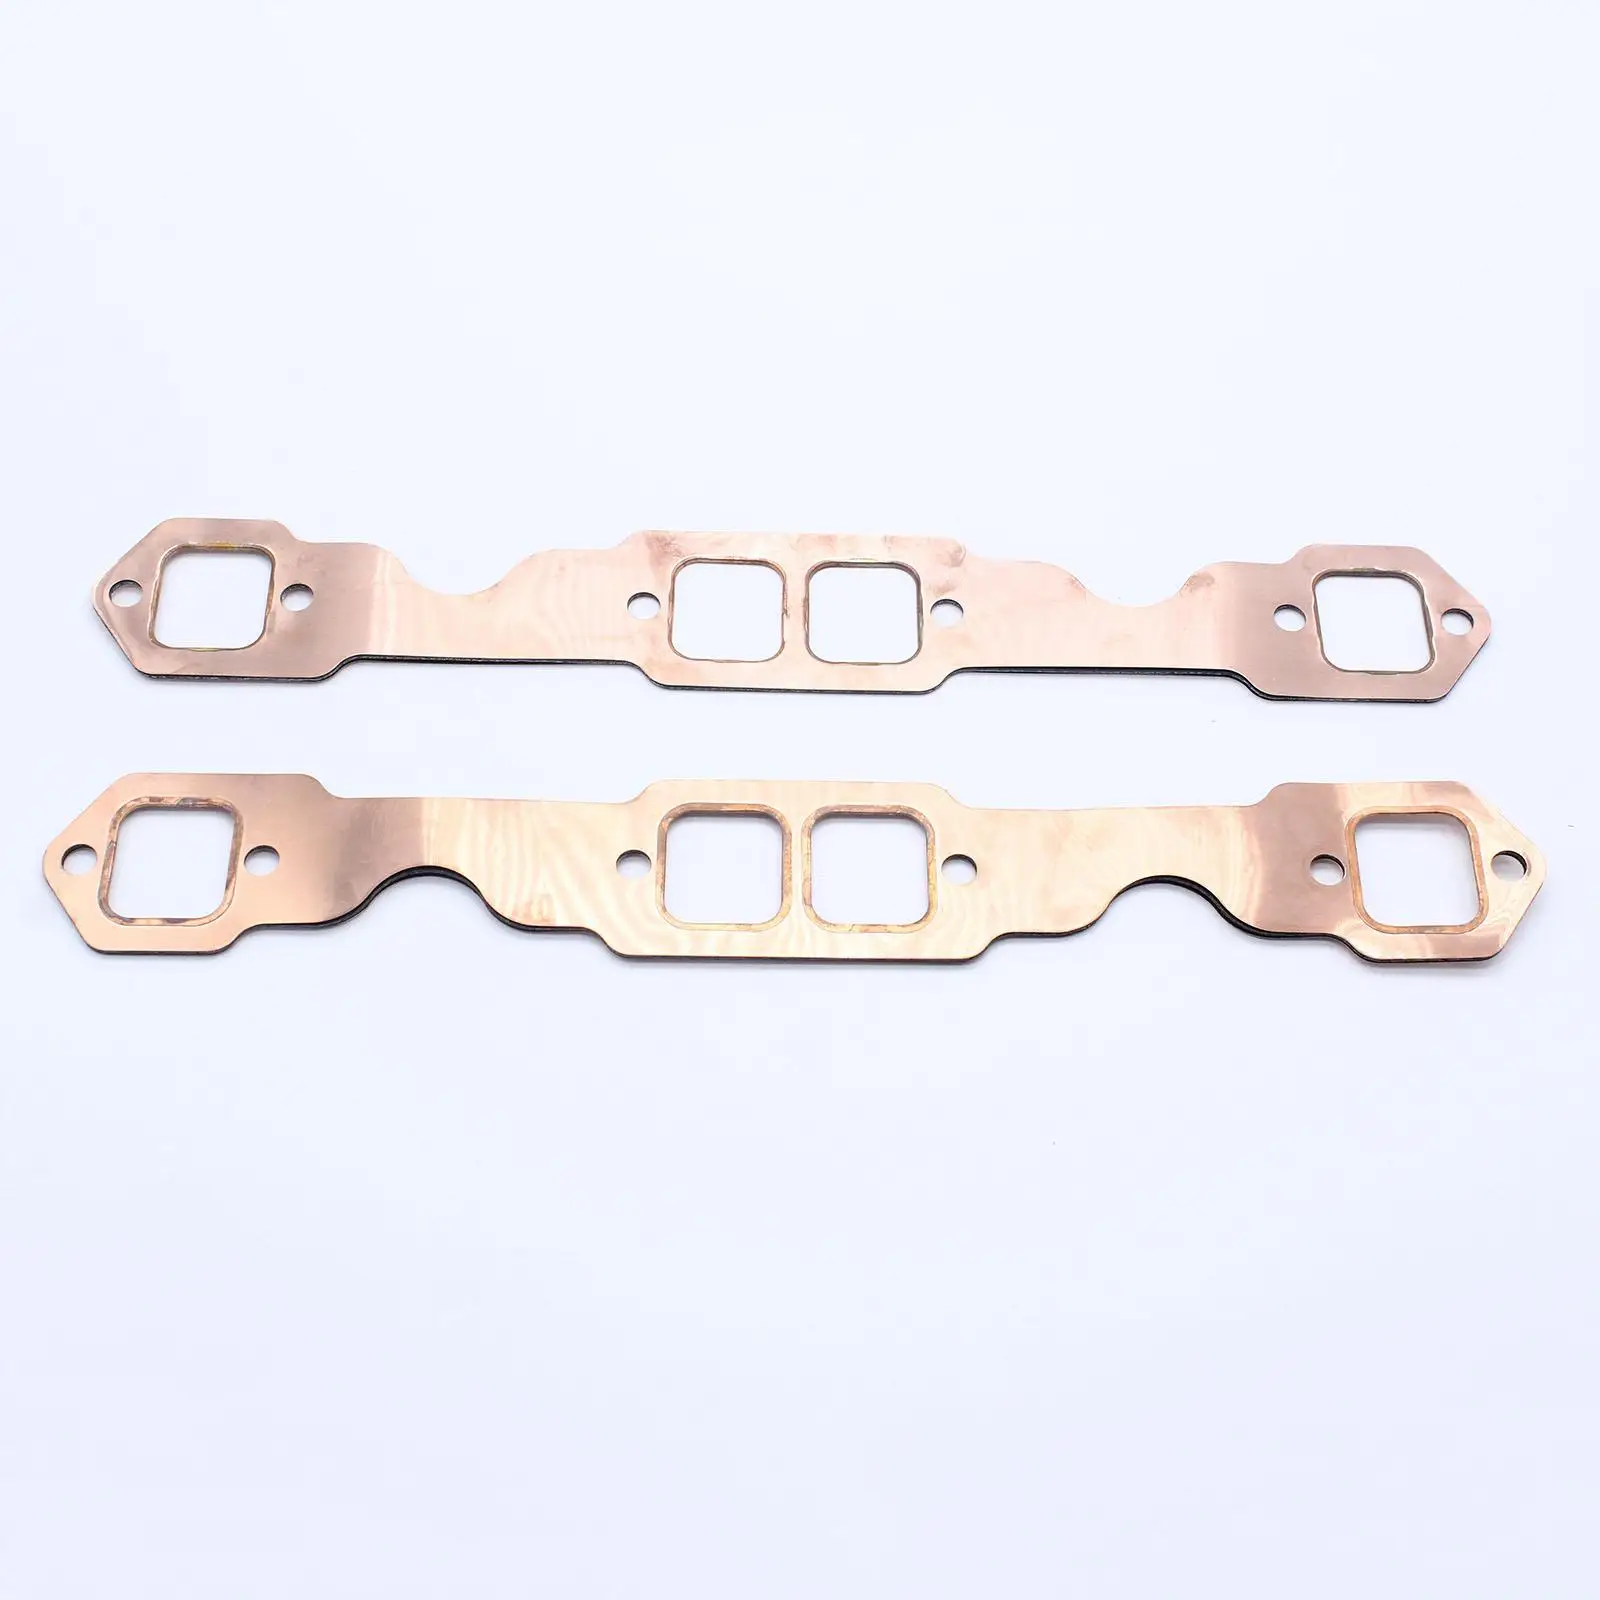 2x SBC Copper Head Exhaust Gasket Seal for 327 305 350 383 Perfect